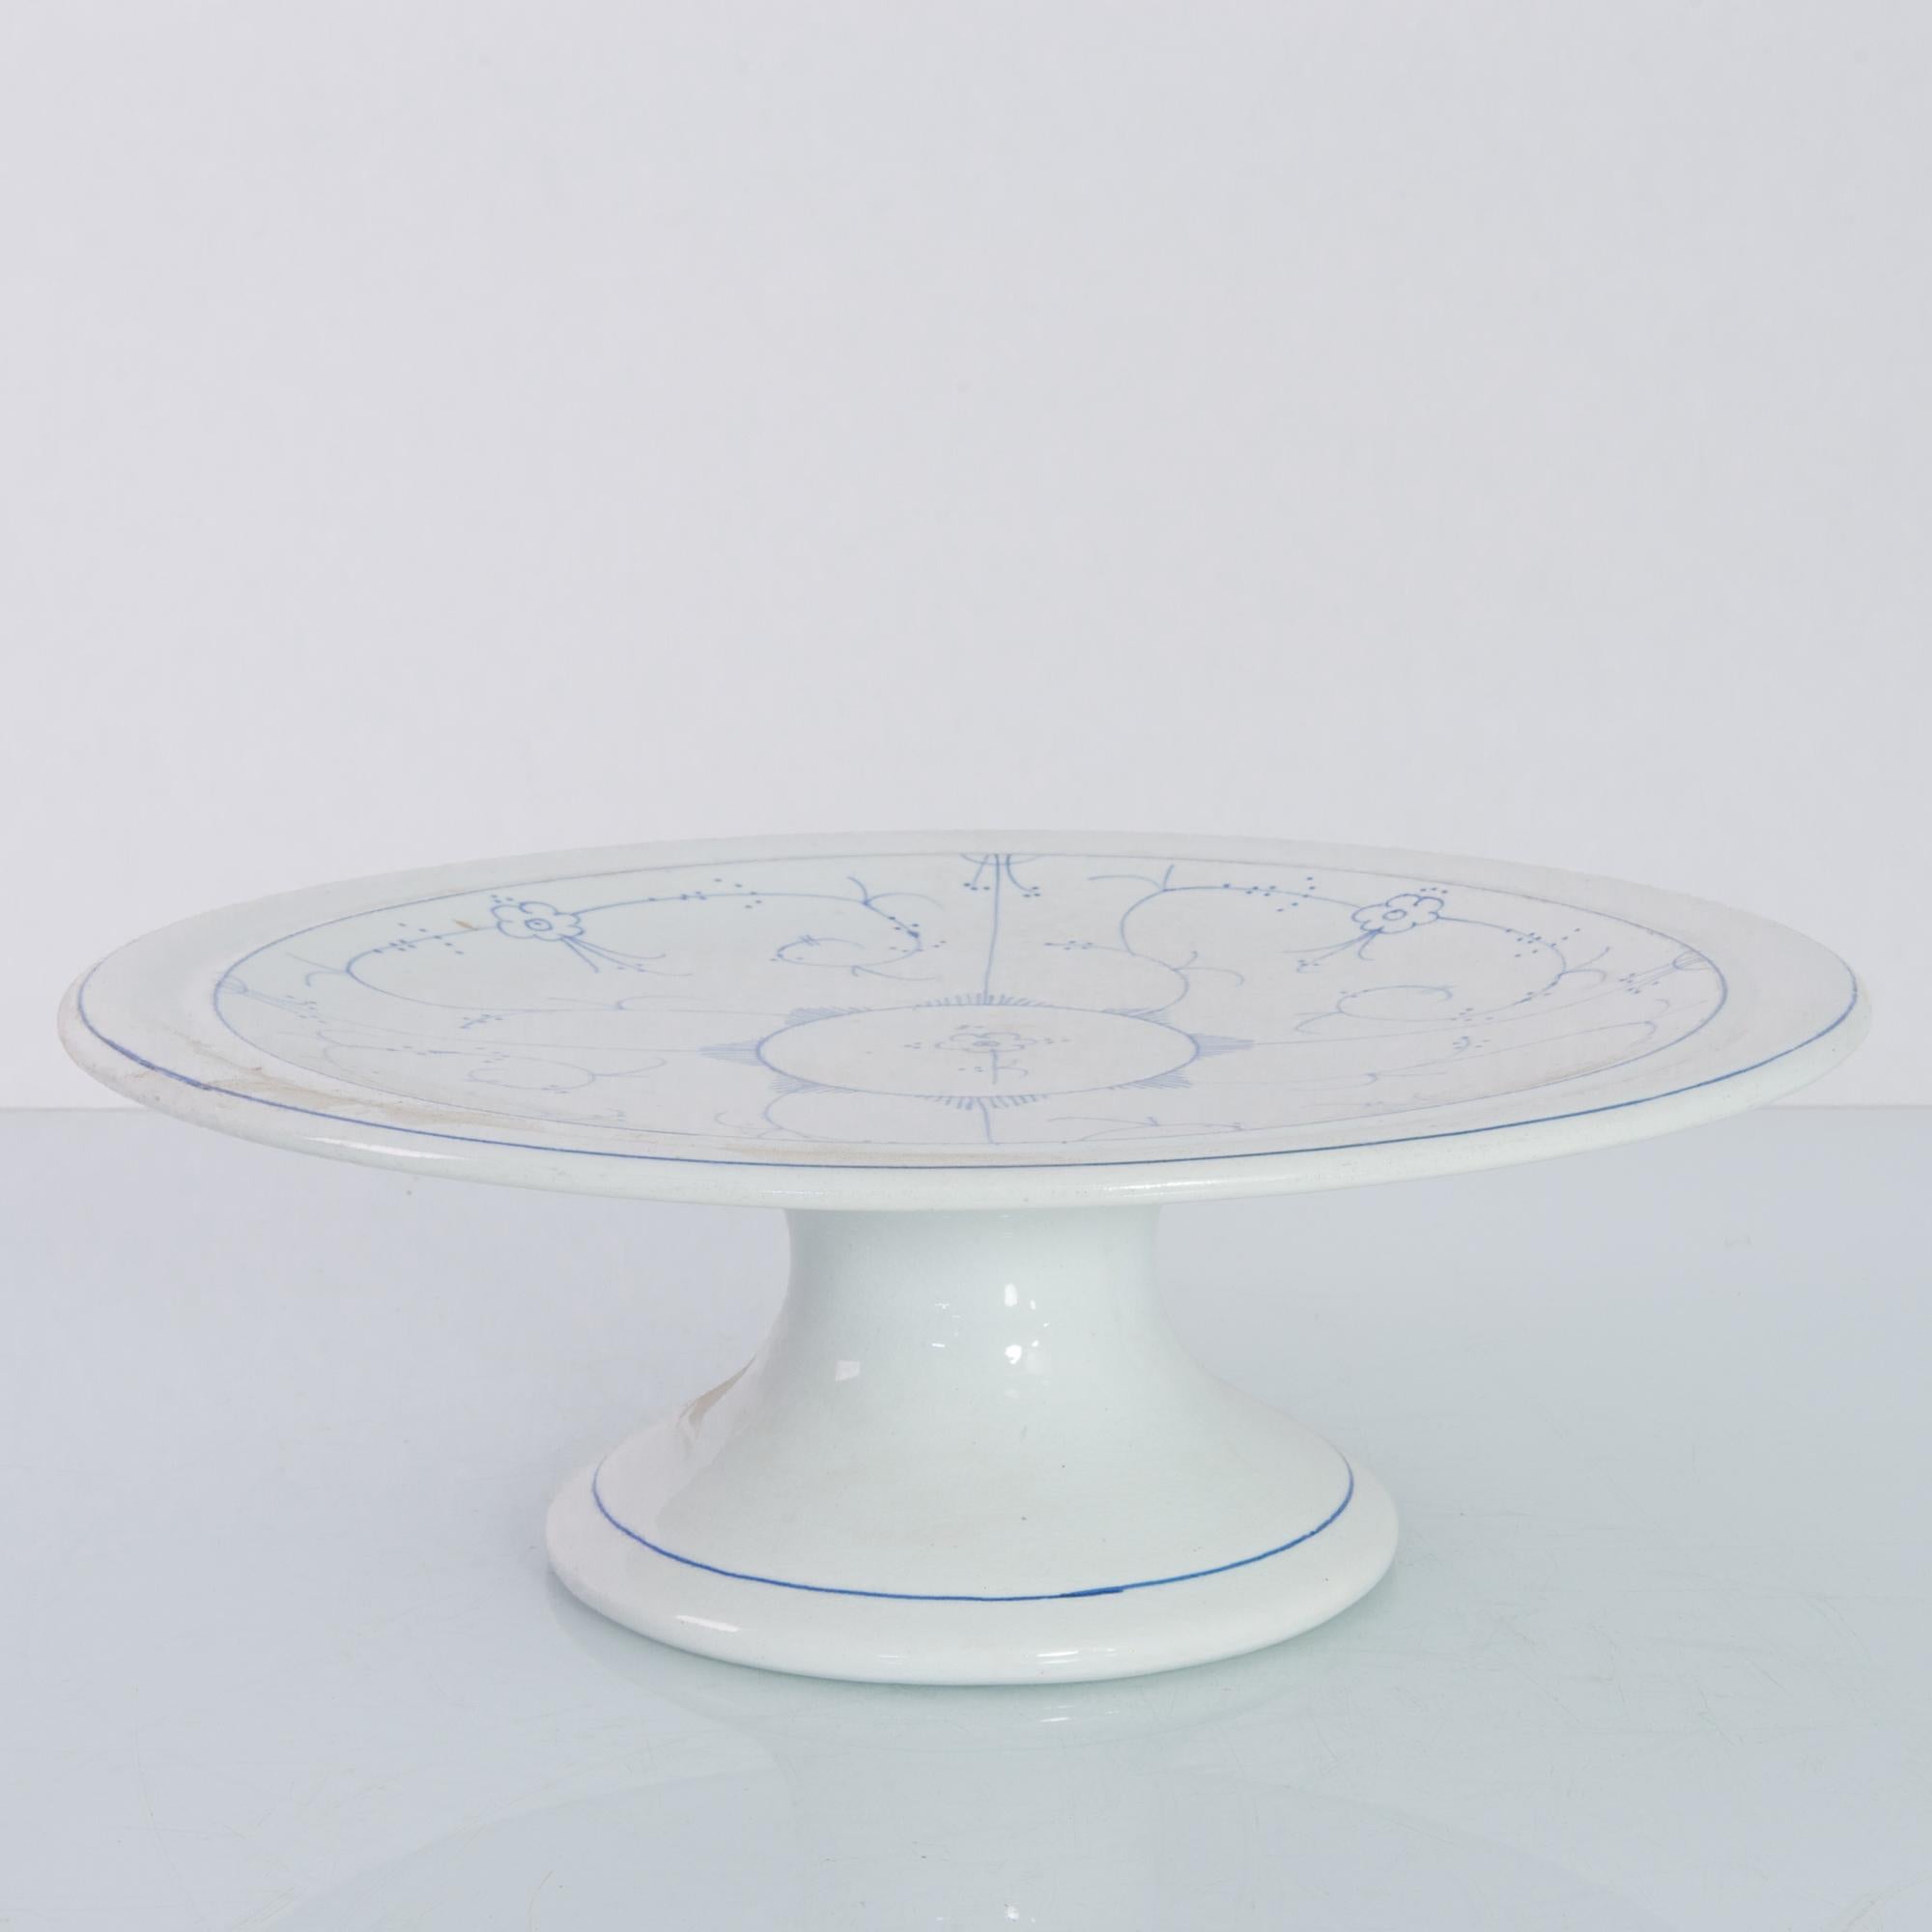 A ceramic cake tray from Denmark, produced circa 1900. A flat plane of circular ceramic coated in thick white glaze. Laced with the signature Royal Copenhagen blue painted glaze; this simple tray merely sits upon its stand and waits for cake. Only